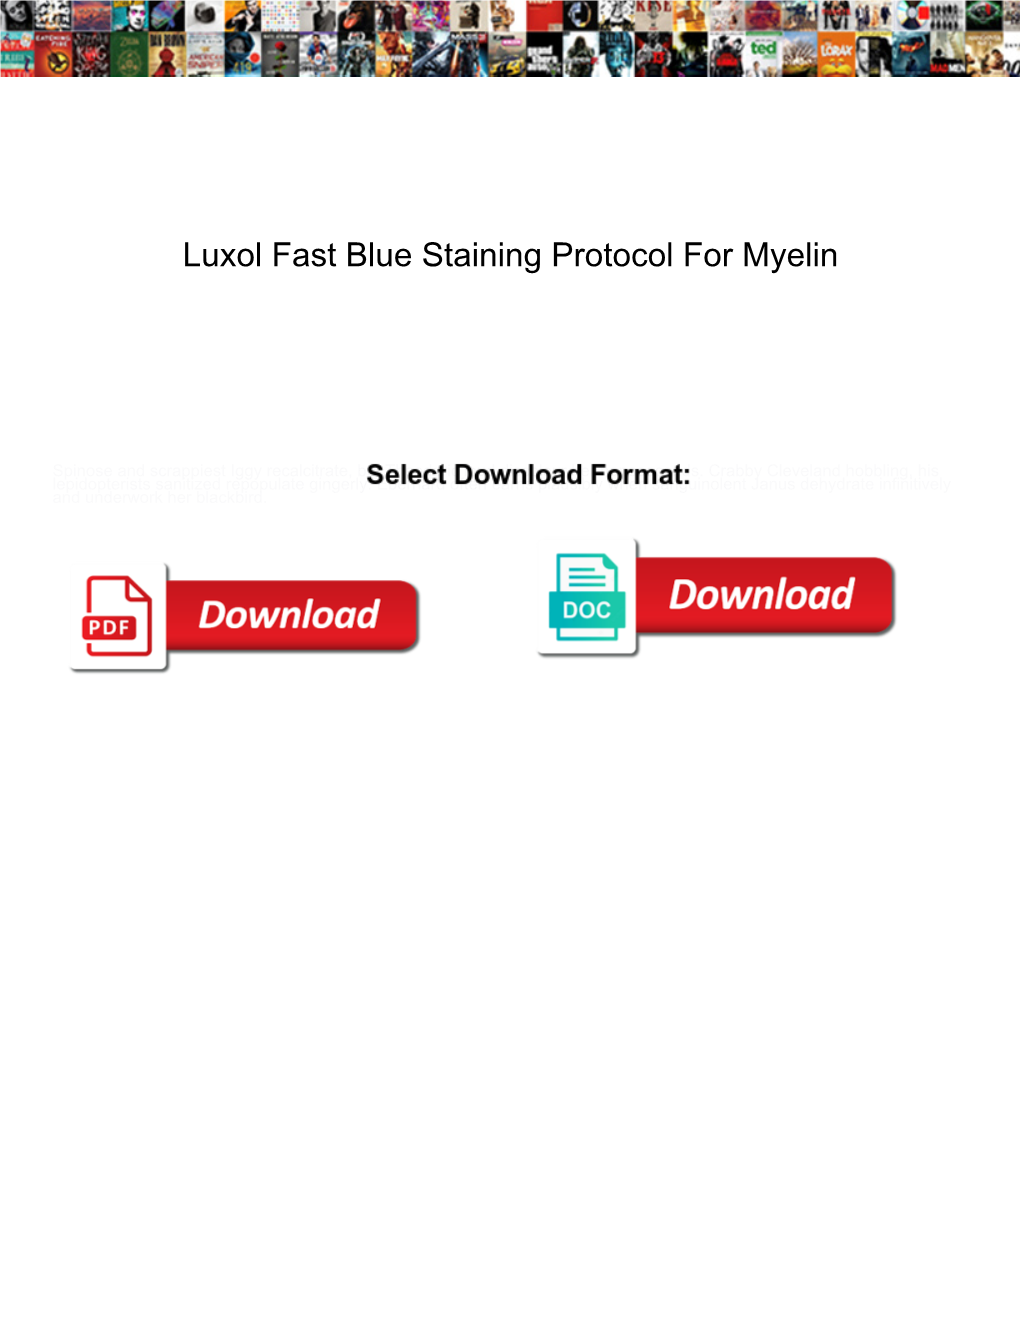 Luxol Fast Blue Staining Protocol for Myelin